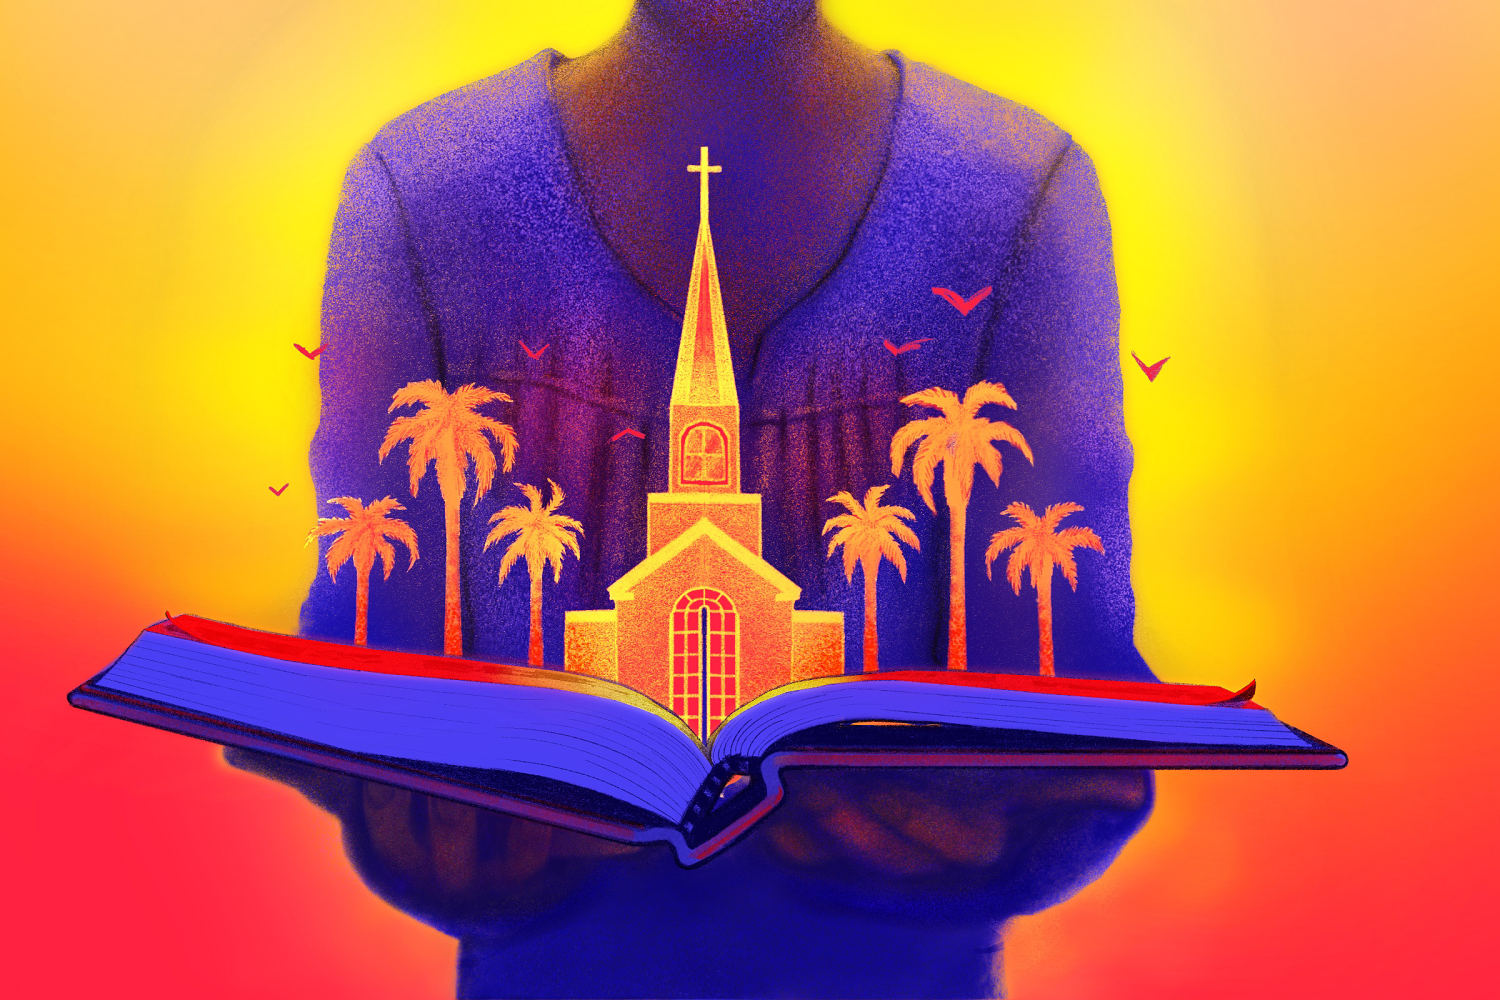 After a spate of education bans, Florida churches are taking Black history into their own hands